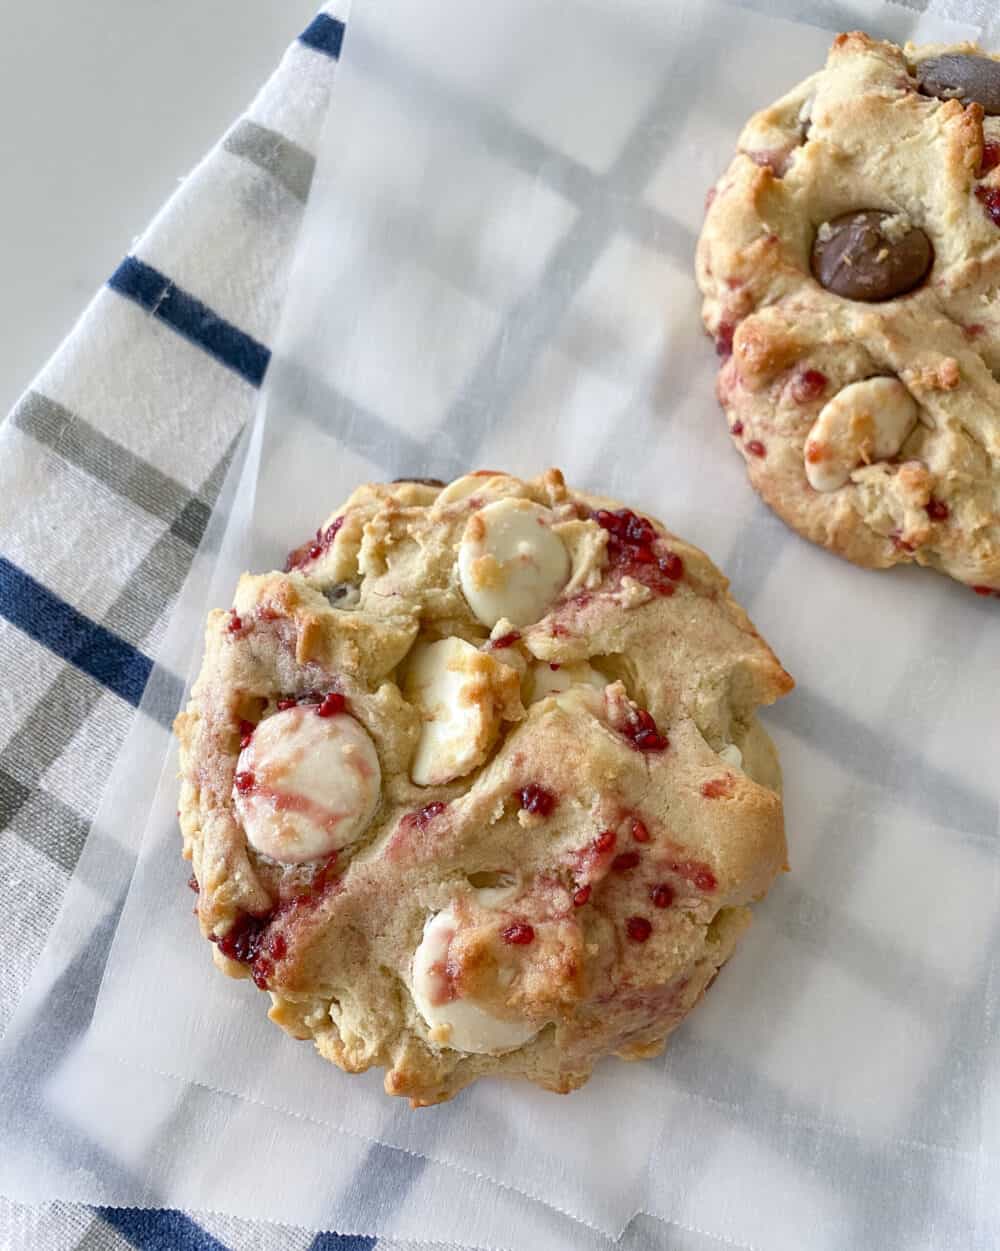 baked white chocolate chip cookies